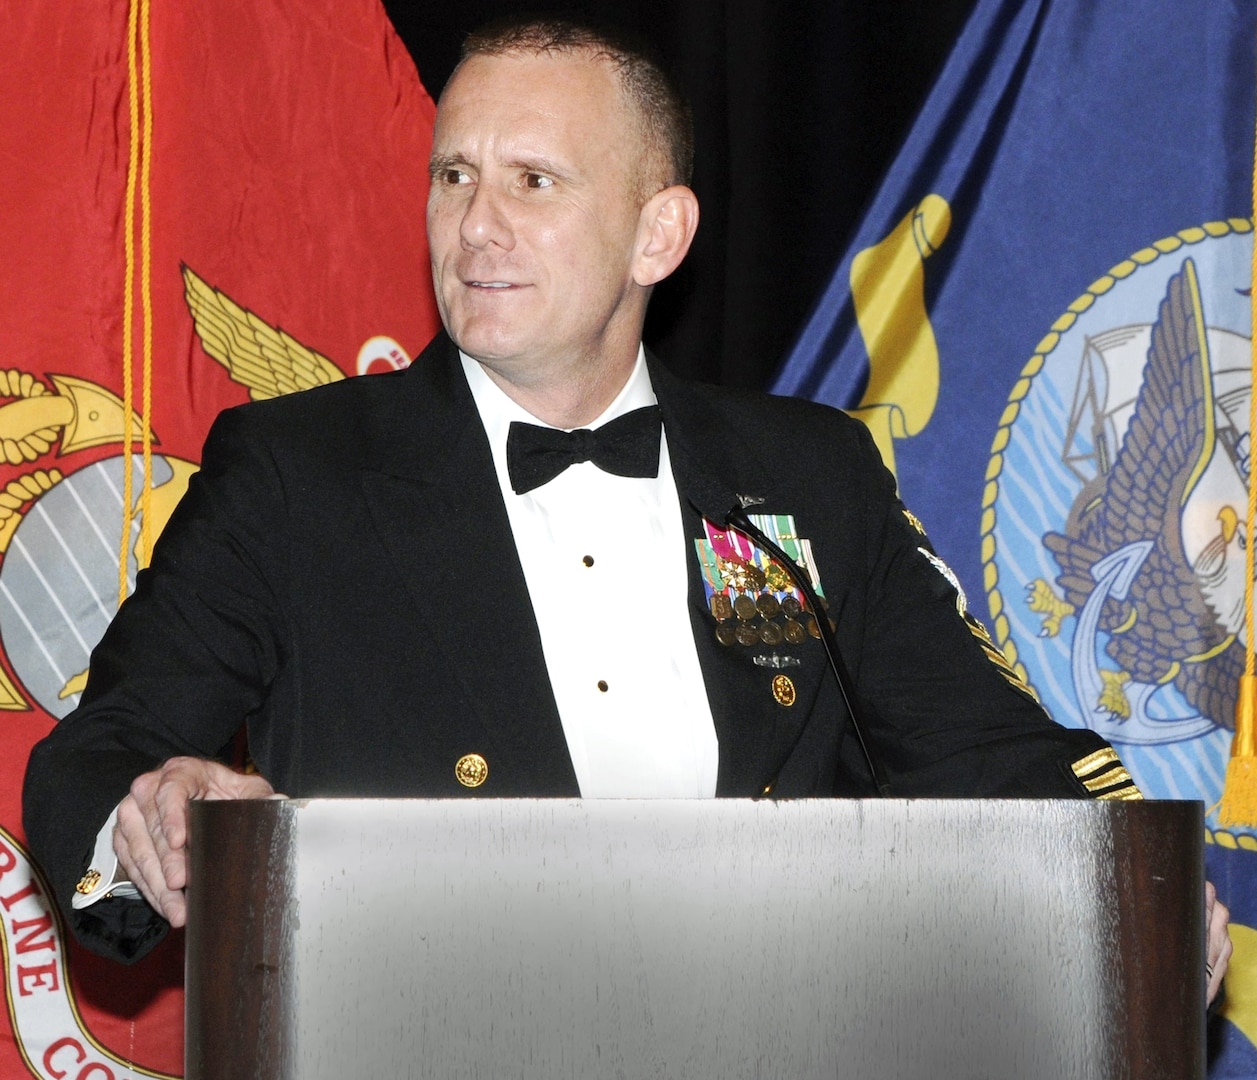 Master Chief Petty Officer of the Navy Steven S. Giordano speaks at the Texas Regional Navy Birthday Ball Oct. 20 in San Antonio, Texas. The different sea service commands in the San Antonio area gather annually to celebrate the Navy birthday in a joint celebration.